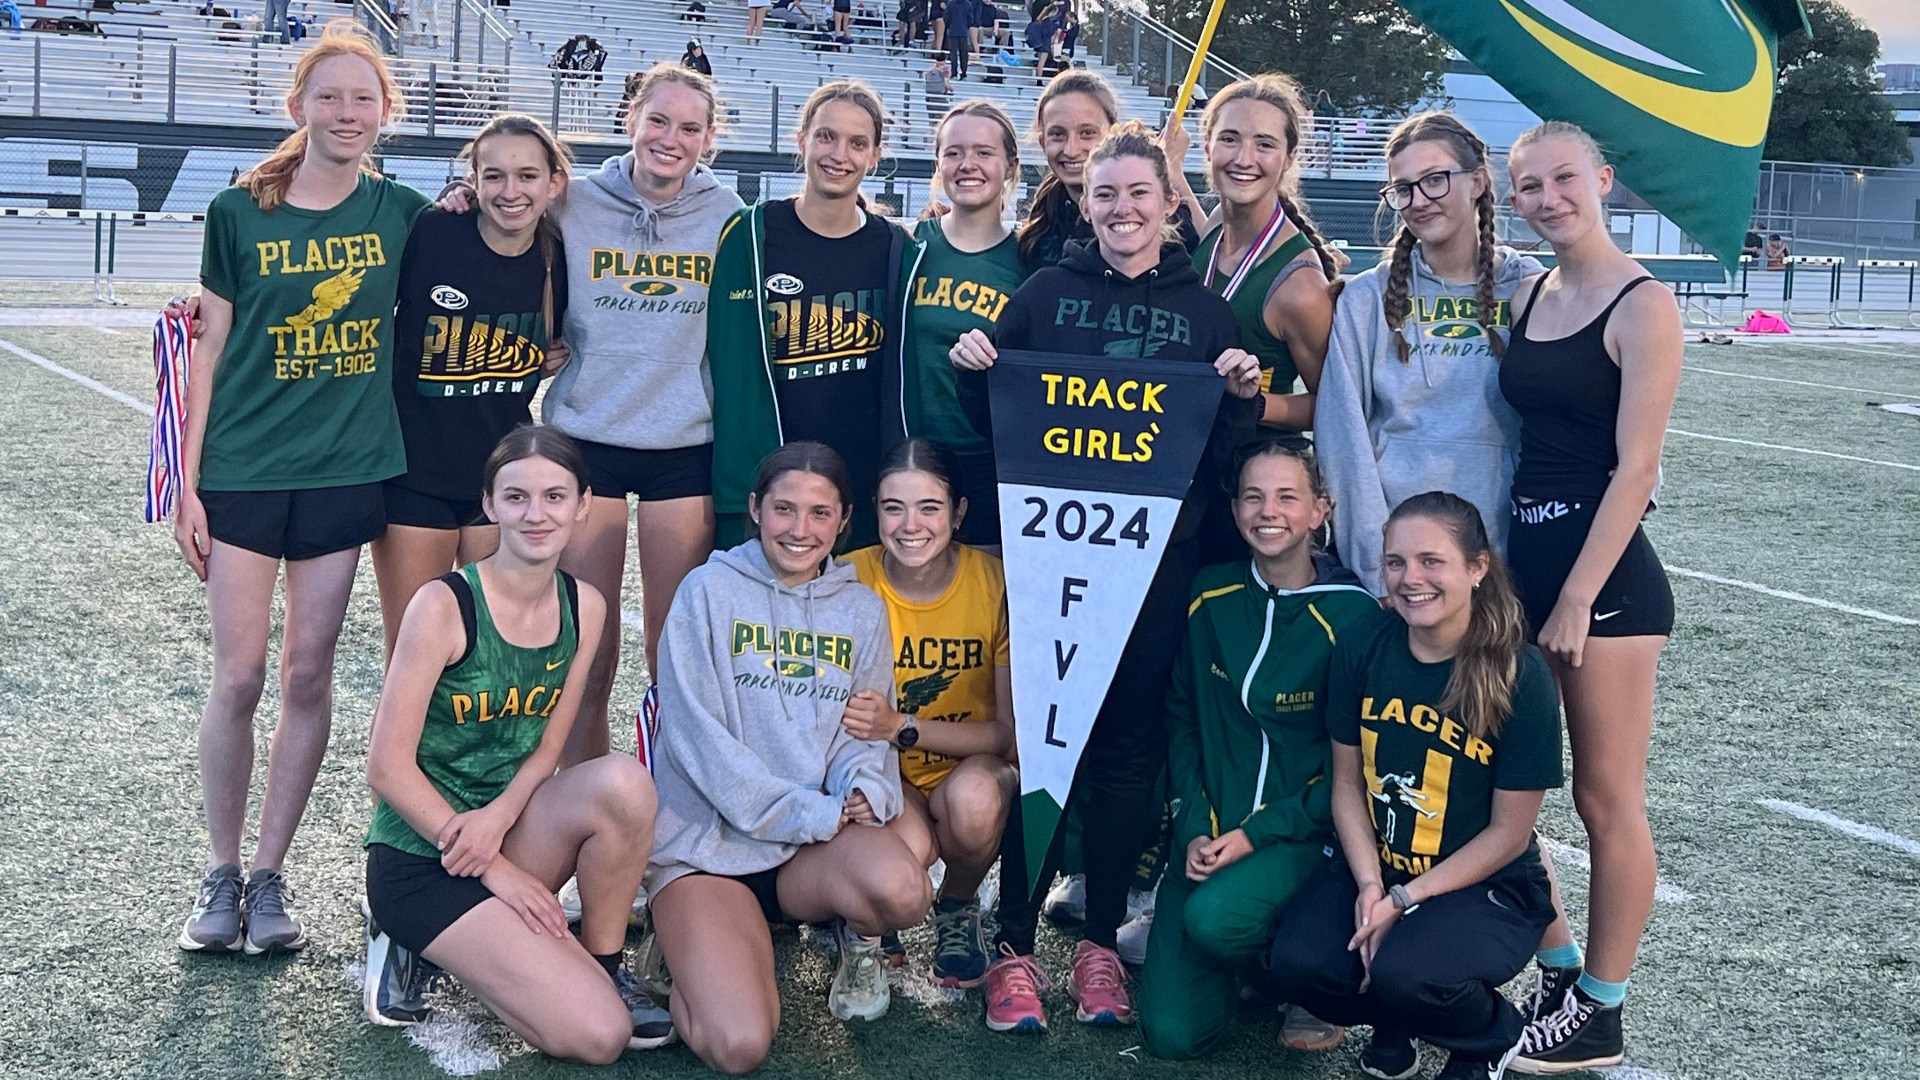 Slide 2 - Placer girls track and field 2024 FVL Champions